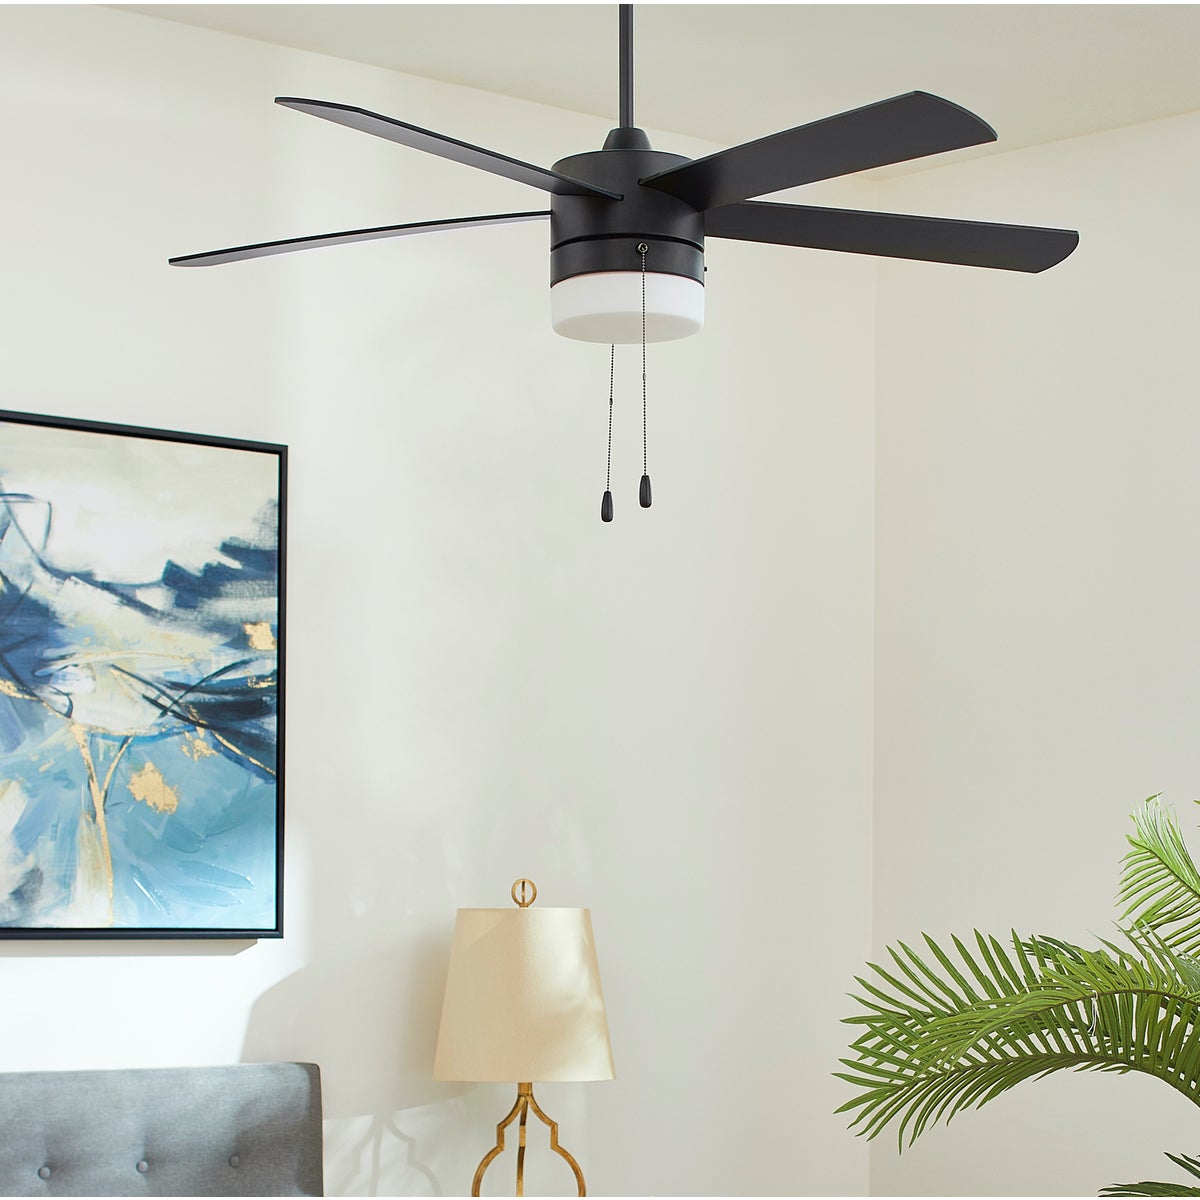 A mid century modern ceiling fan with five blades and a translucent lighting shade, designed for efficient air circulation. 52" sweep.